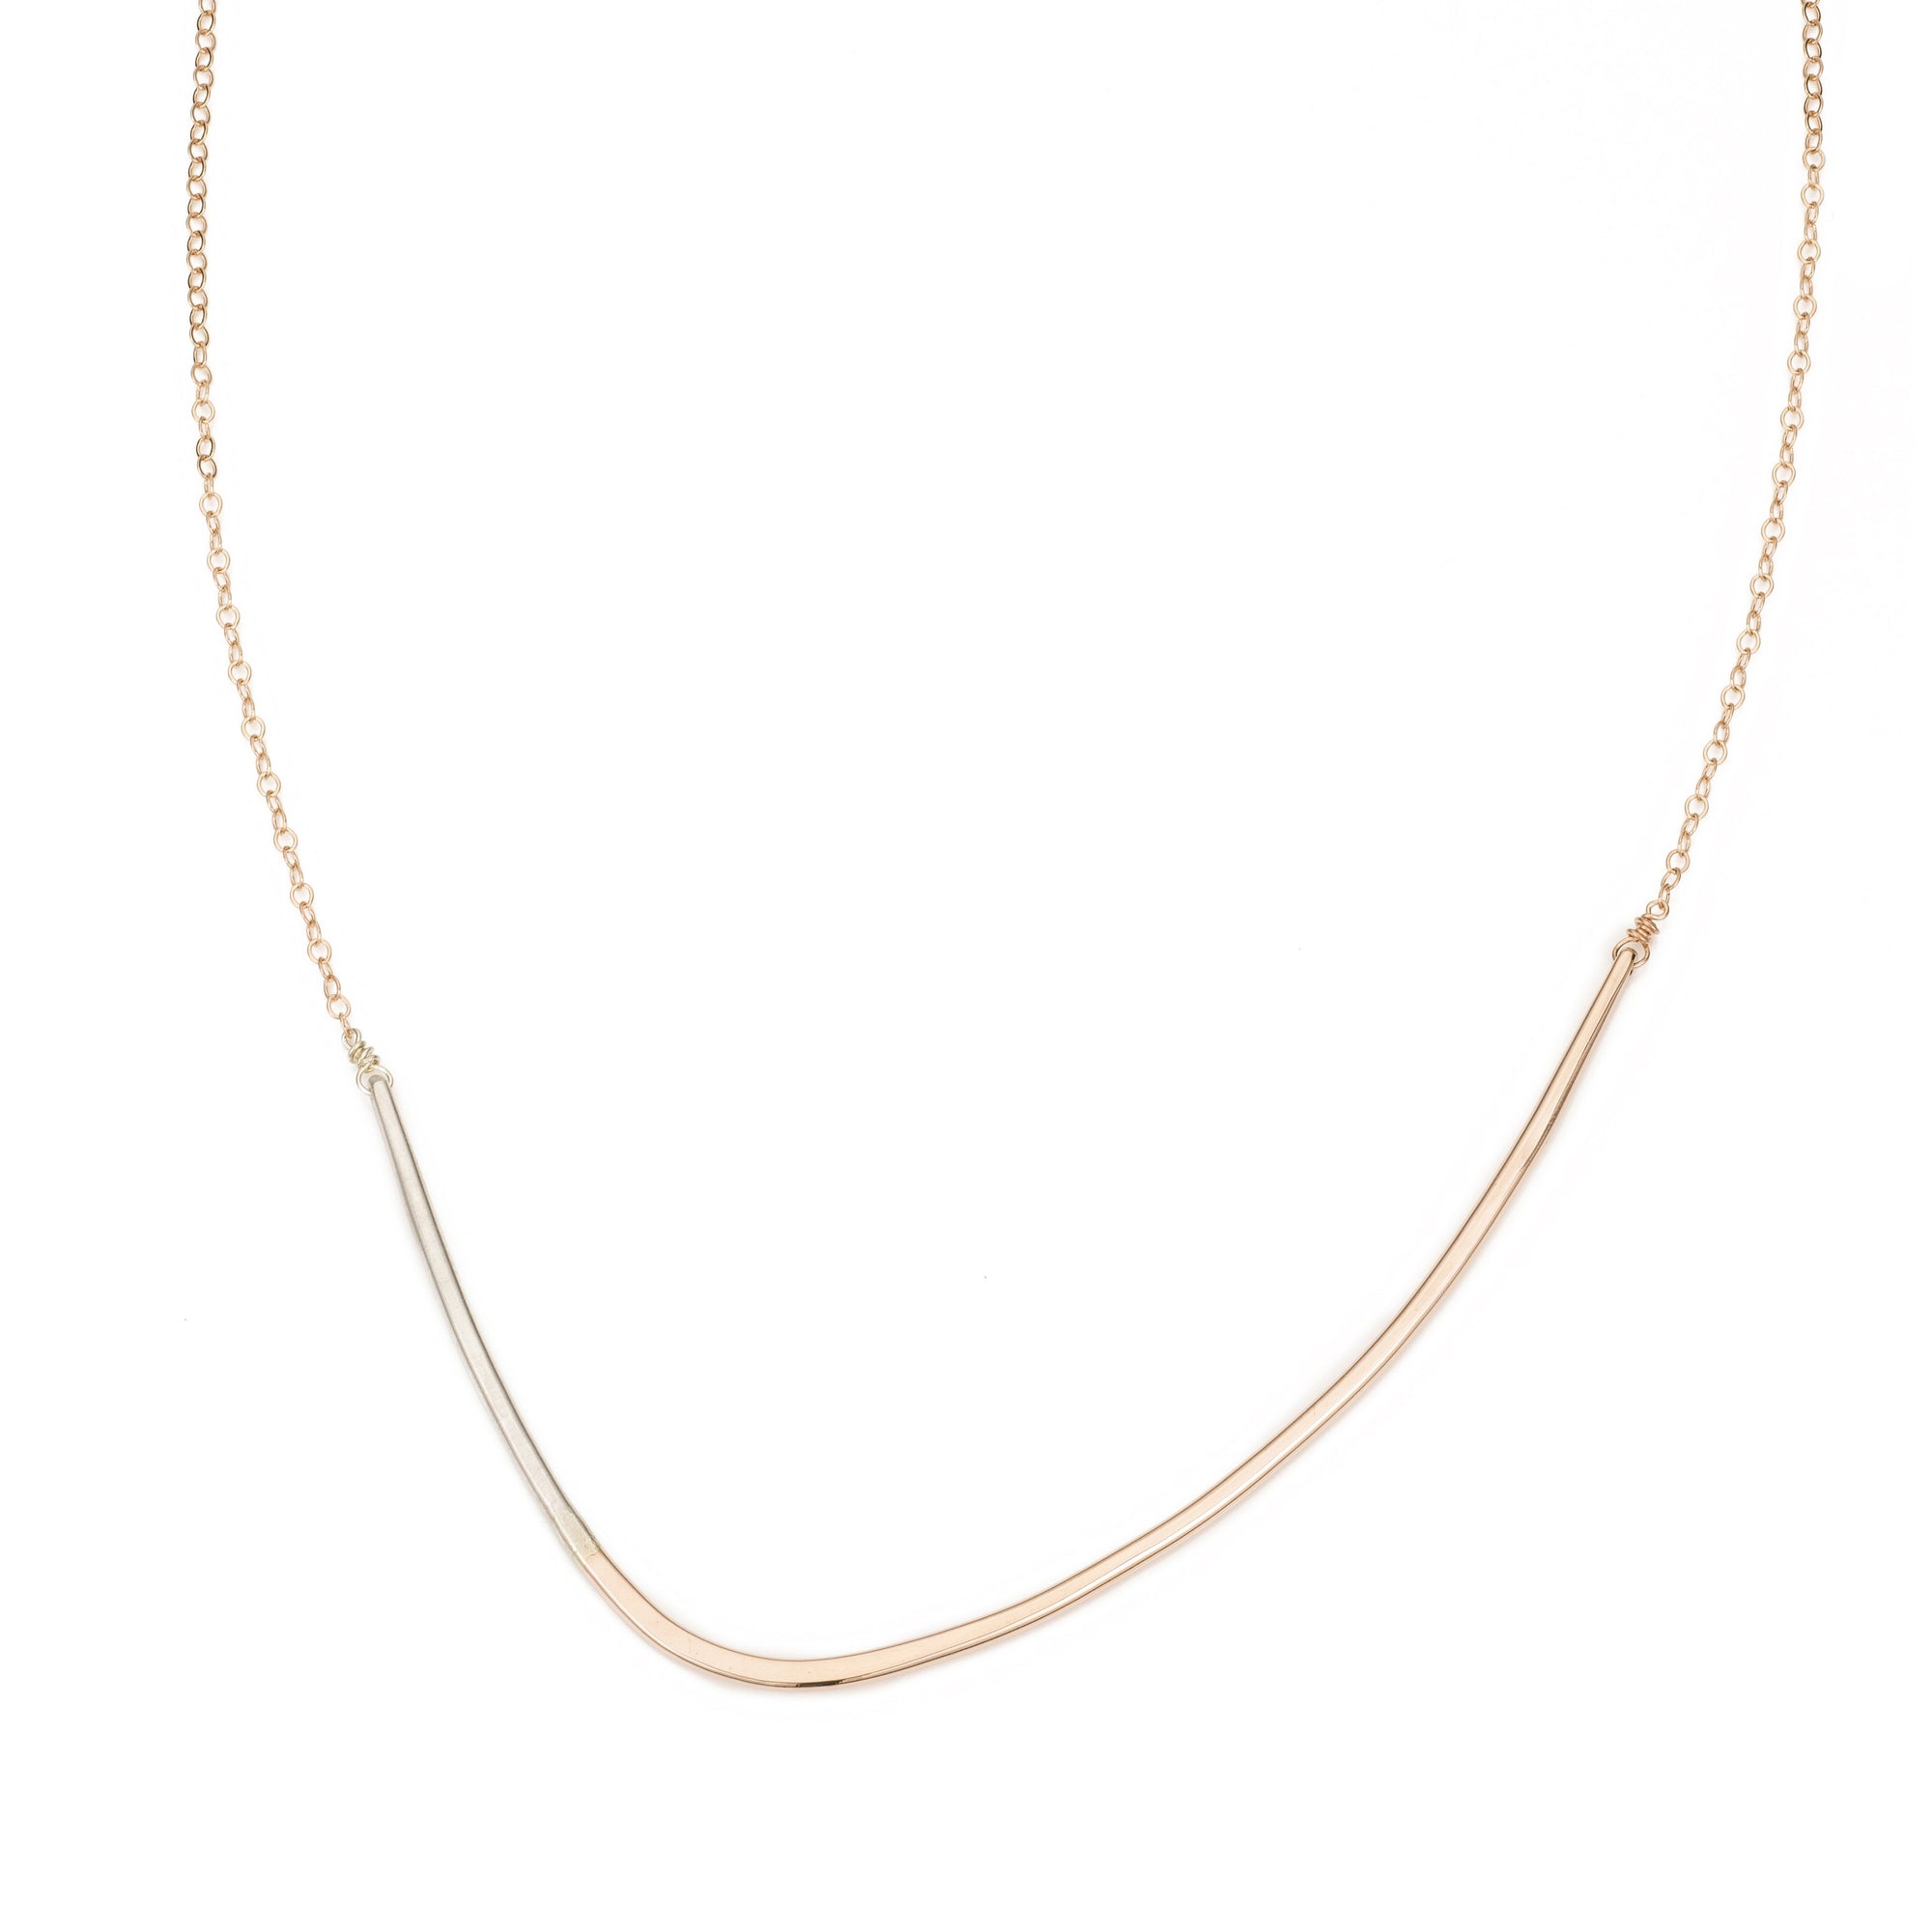 Inflecto Necklace | Colleen Mauer Designs